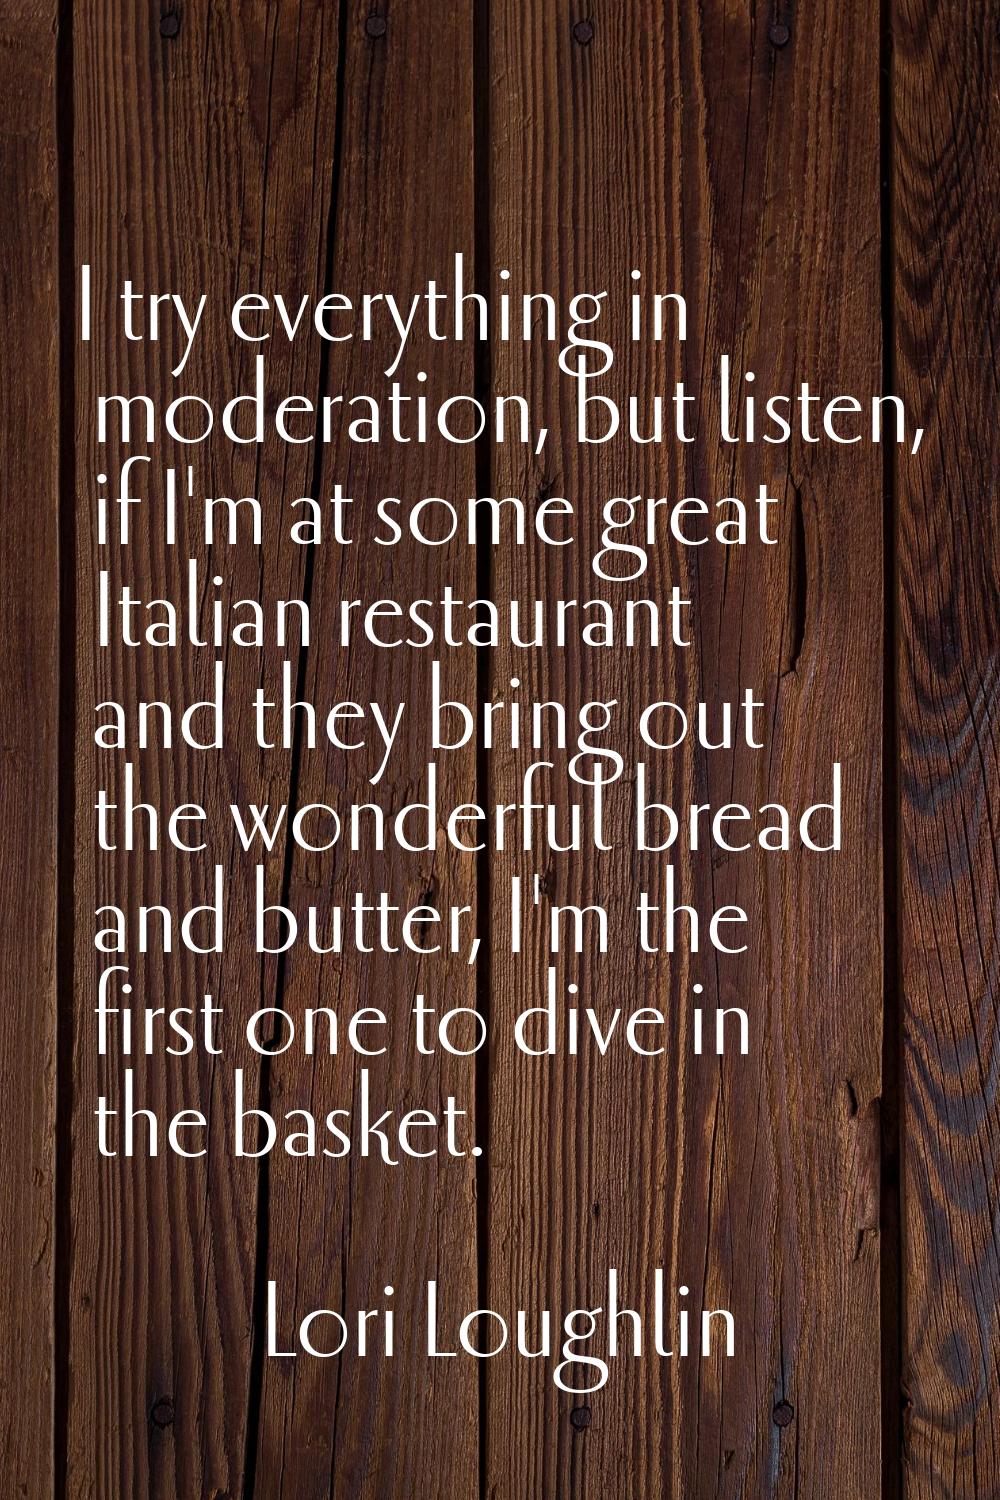 I try everything in moderation, but listen, if I'm at some great Italian restaurant and they bring 